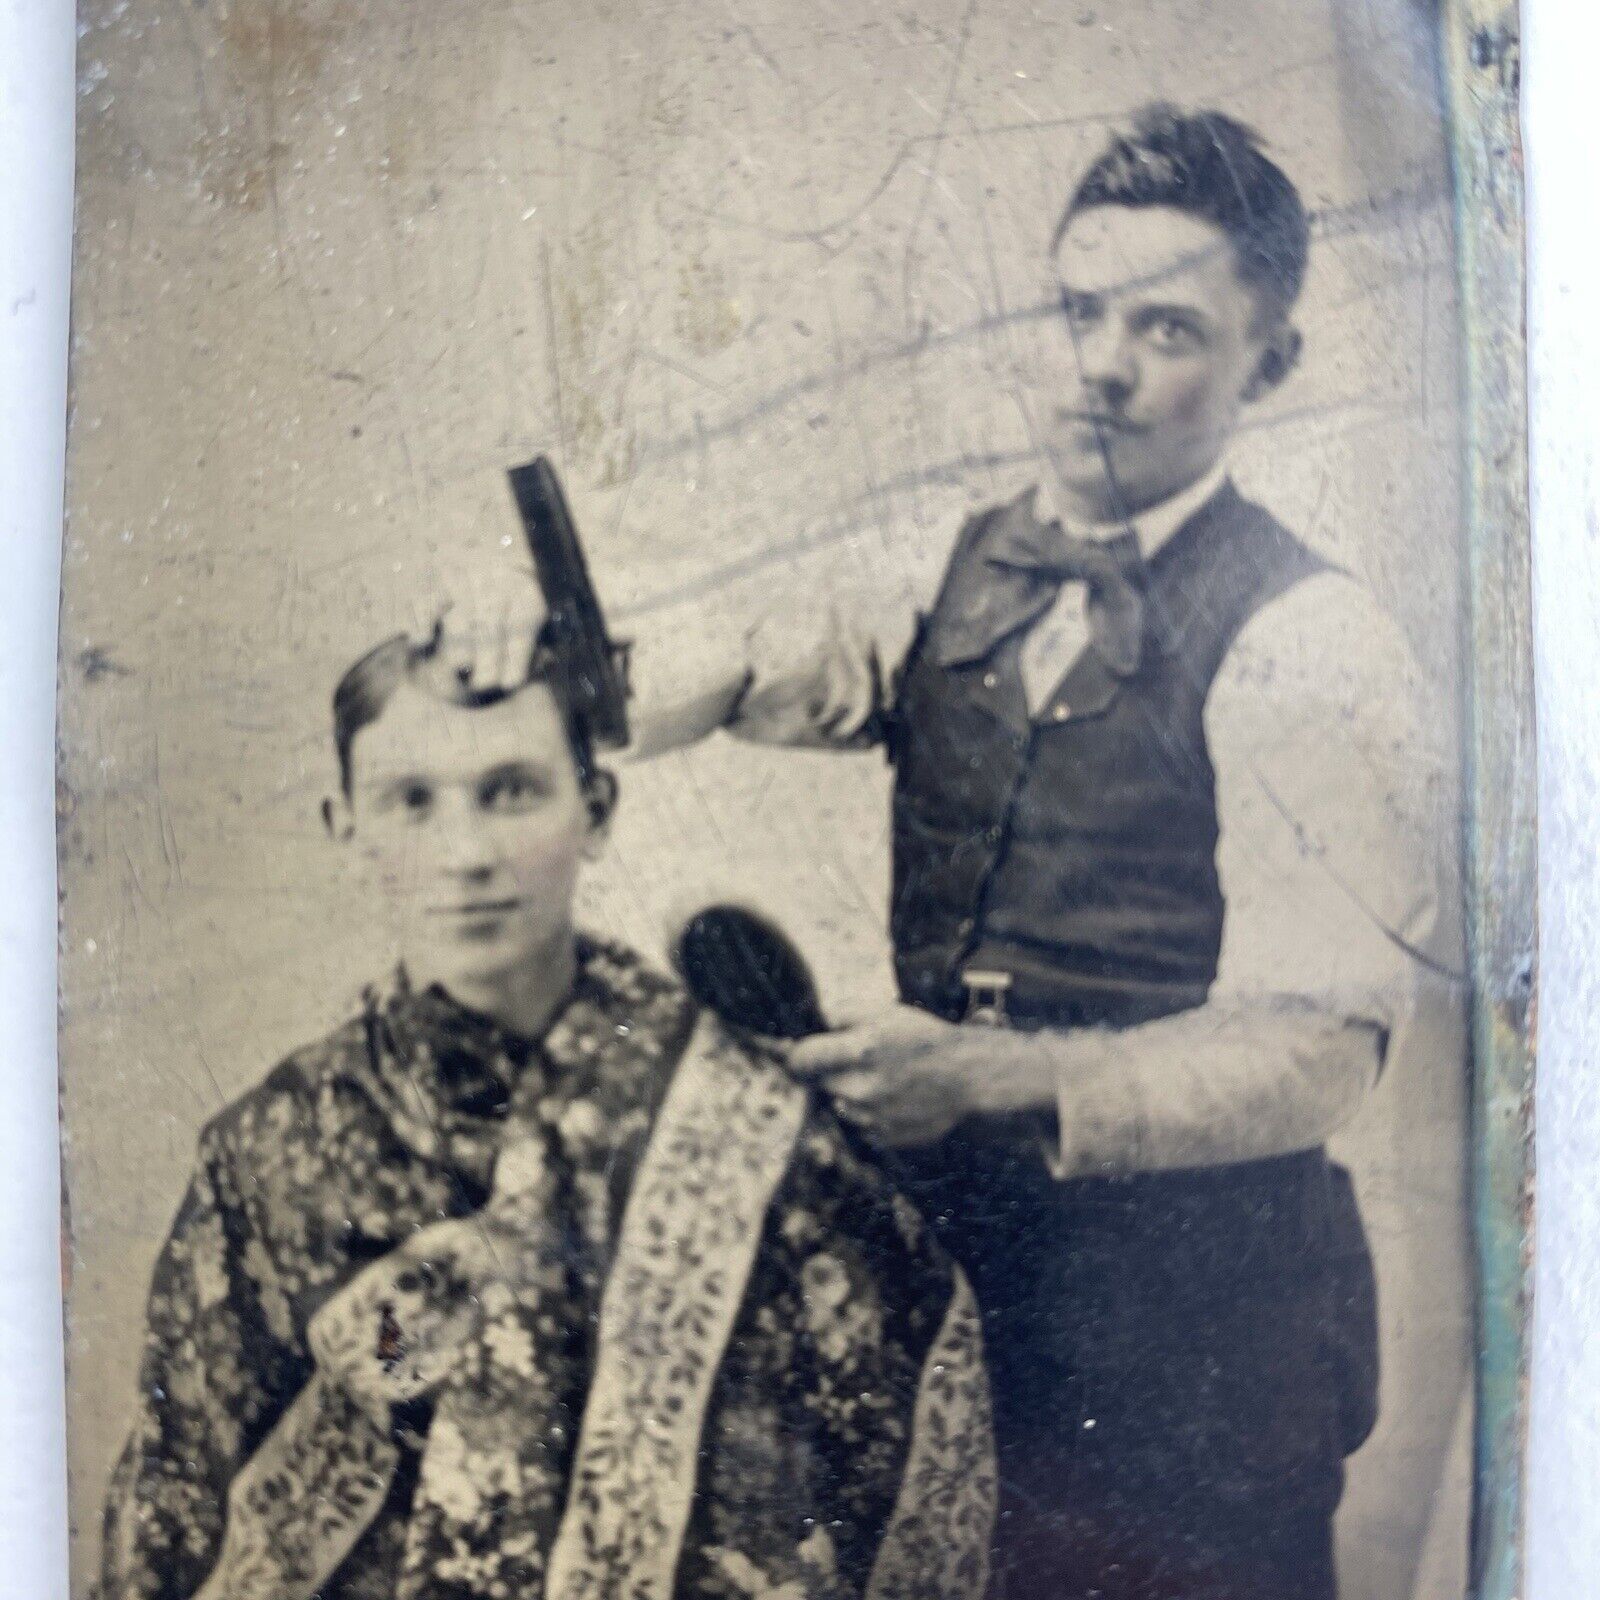 Antique Vintage Tintype Photo Barber With Man Client Comb & Brush Occupation